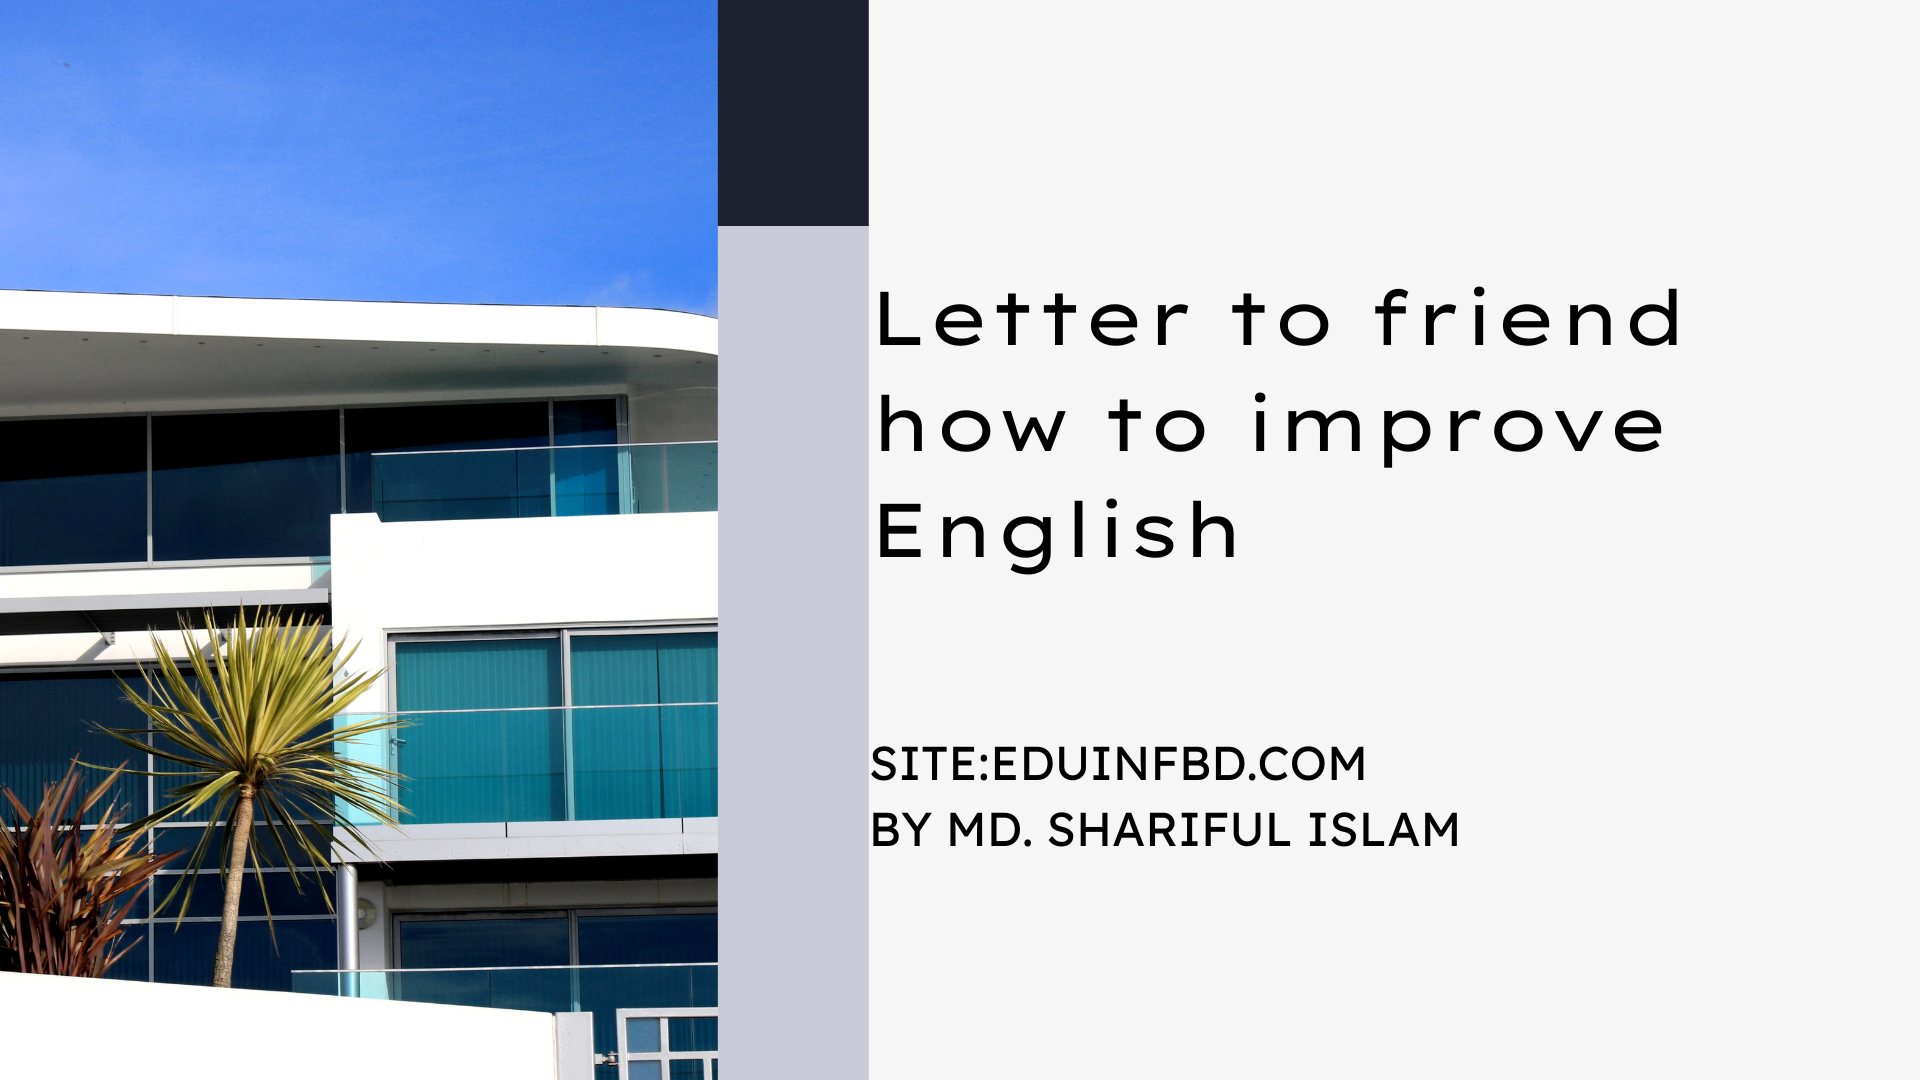 Letter to friend how to improve English